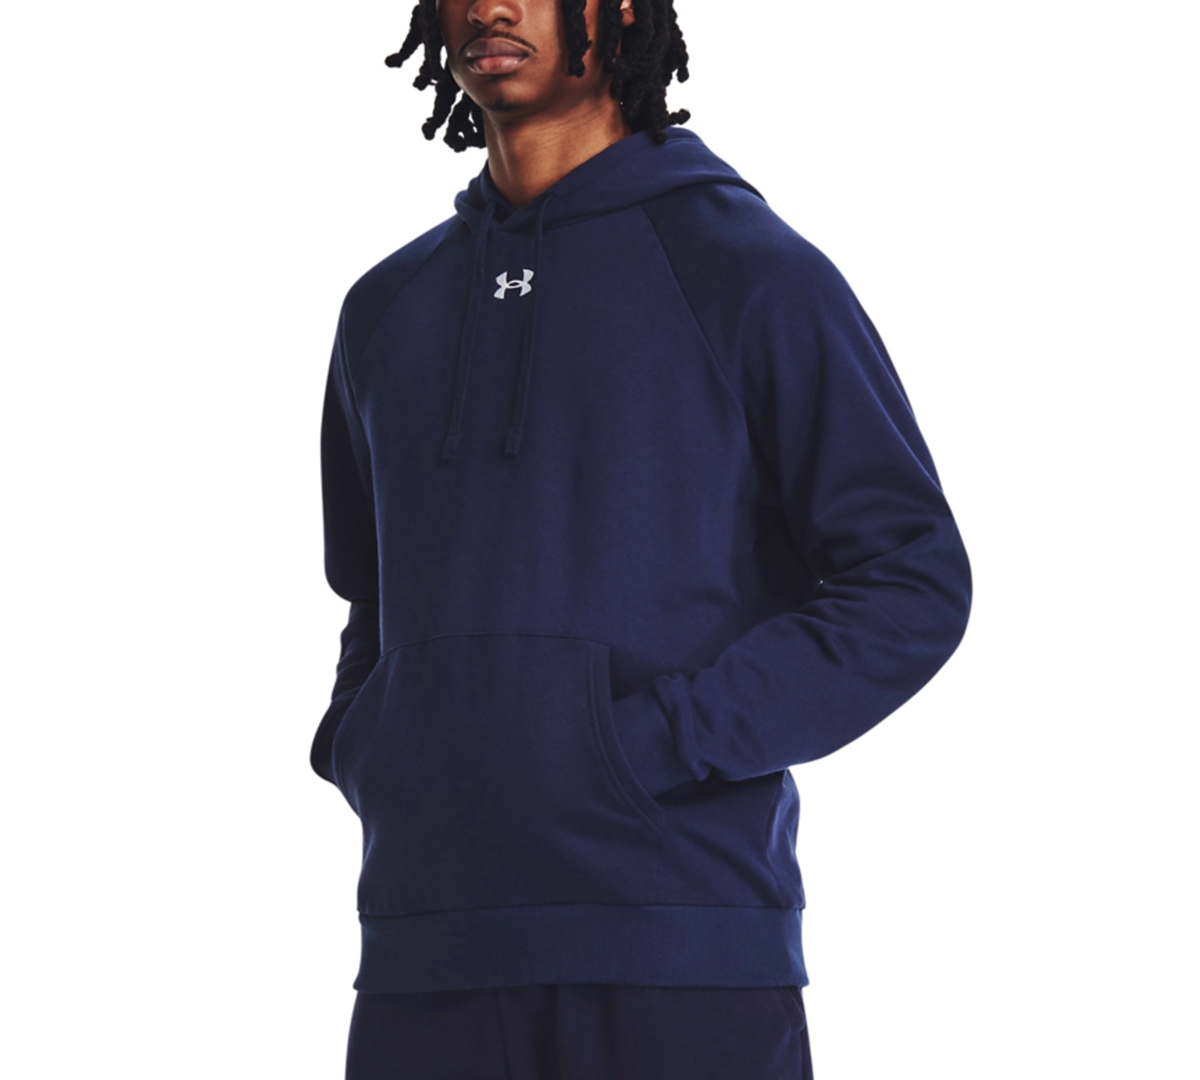 Under Armour Men's Rival Logo Embroidered Fleece Hoodie In Navy,wht